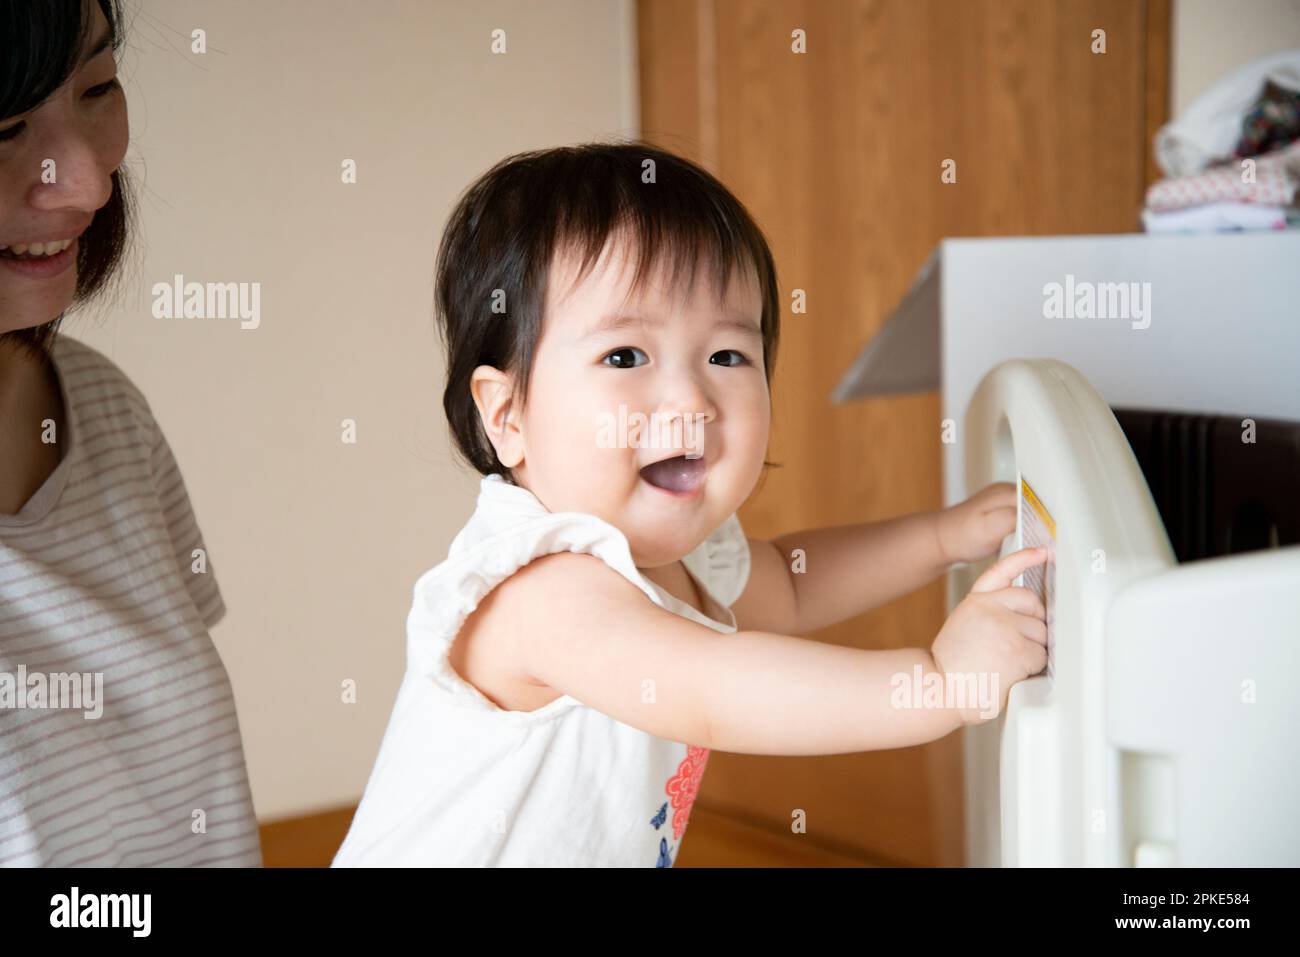 Baby standing on hands and feet Stock Photo